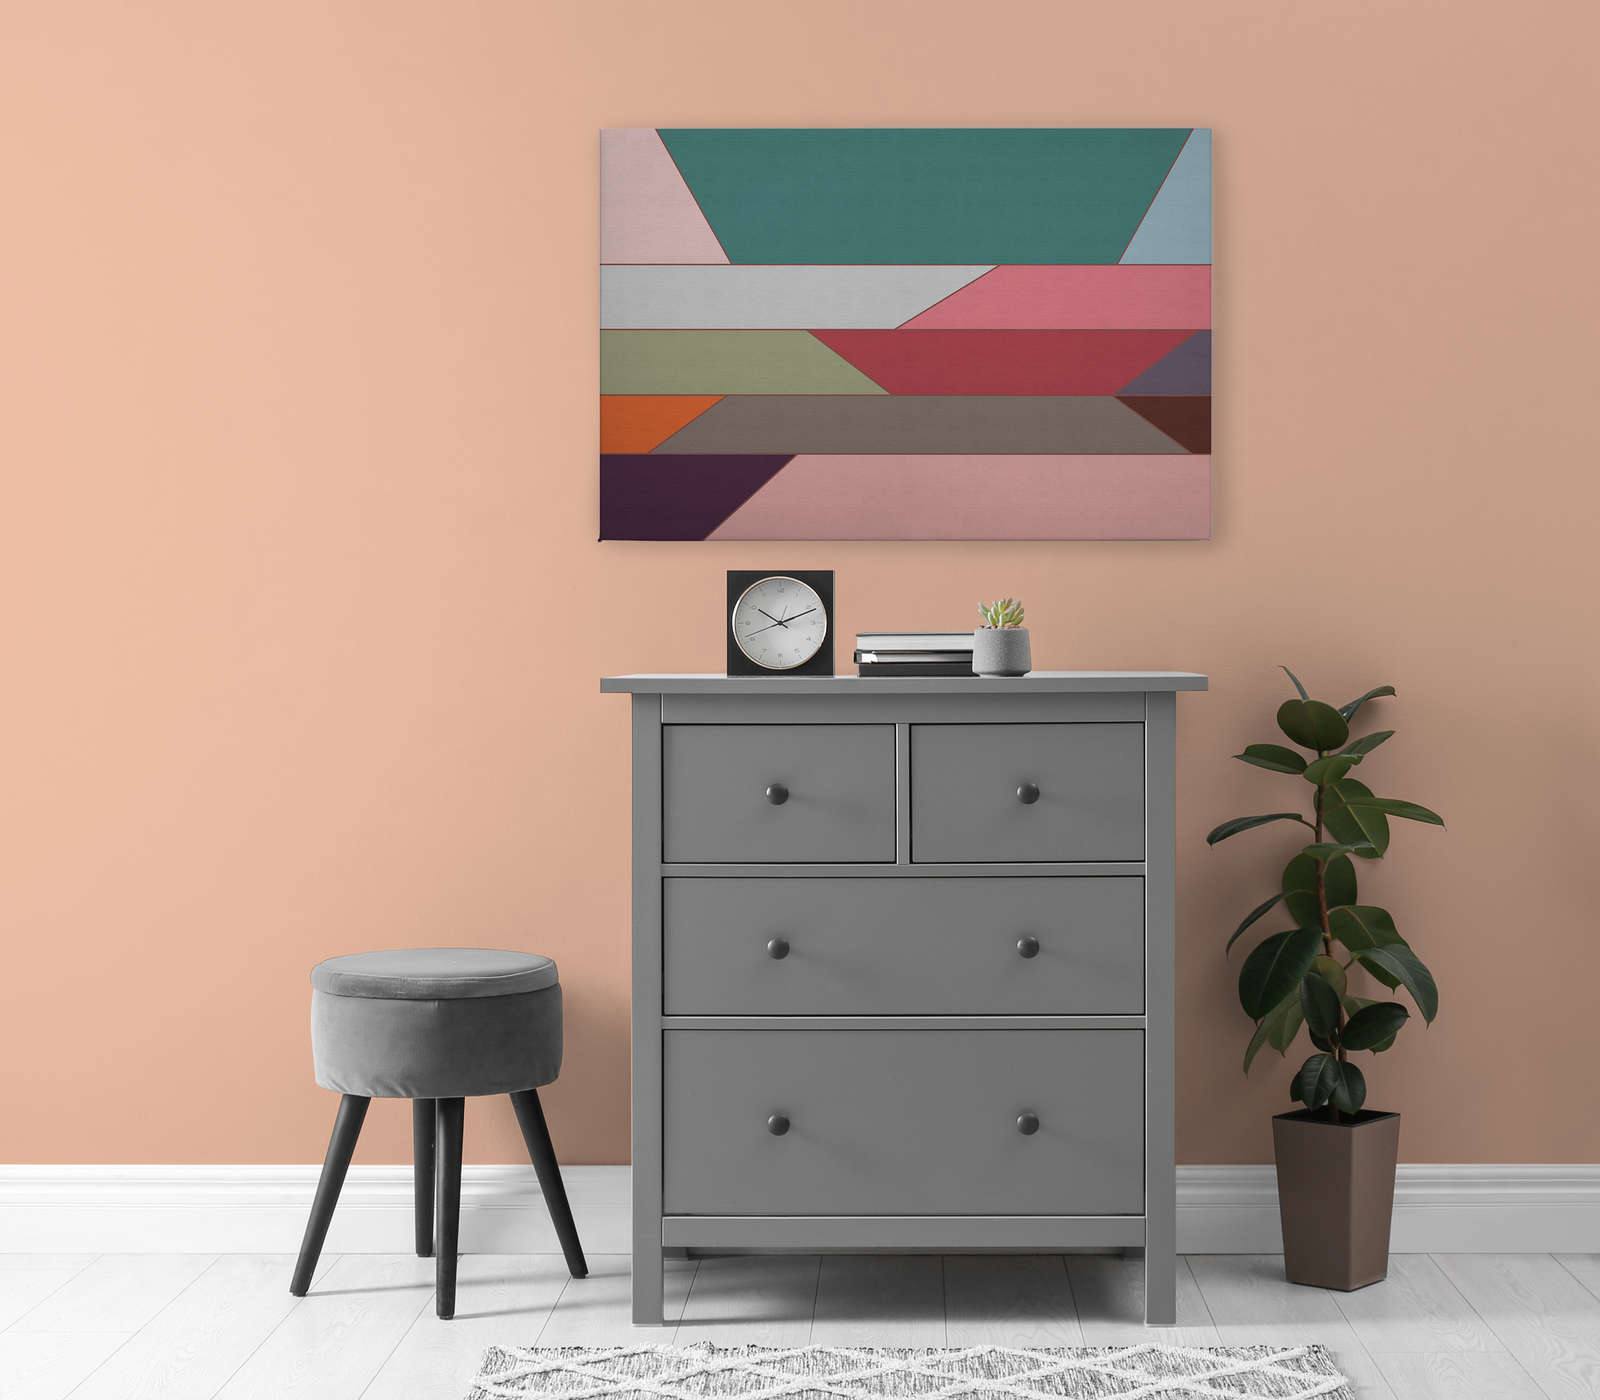             Geometry 2 - Canvas painting with colourful horizontal stripe pattern in ribbed structure - 0.90 m x 0.60 m
        